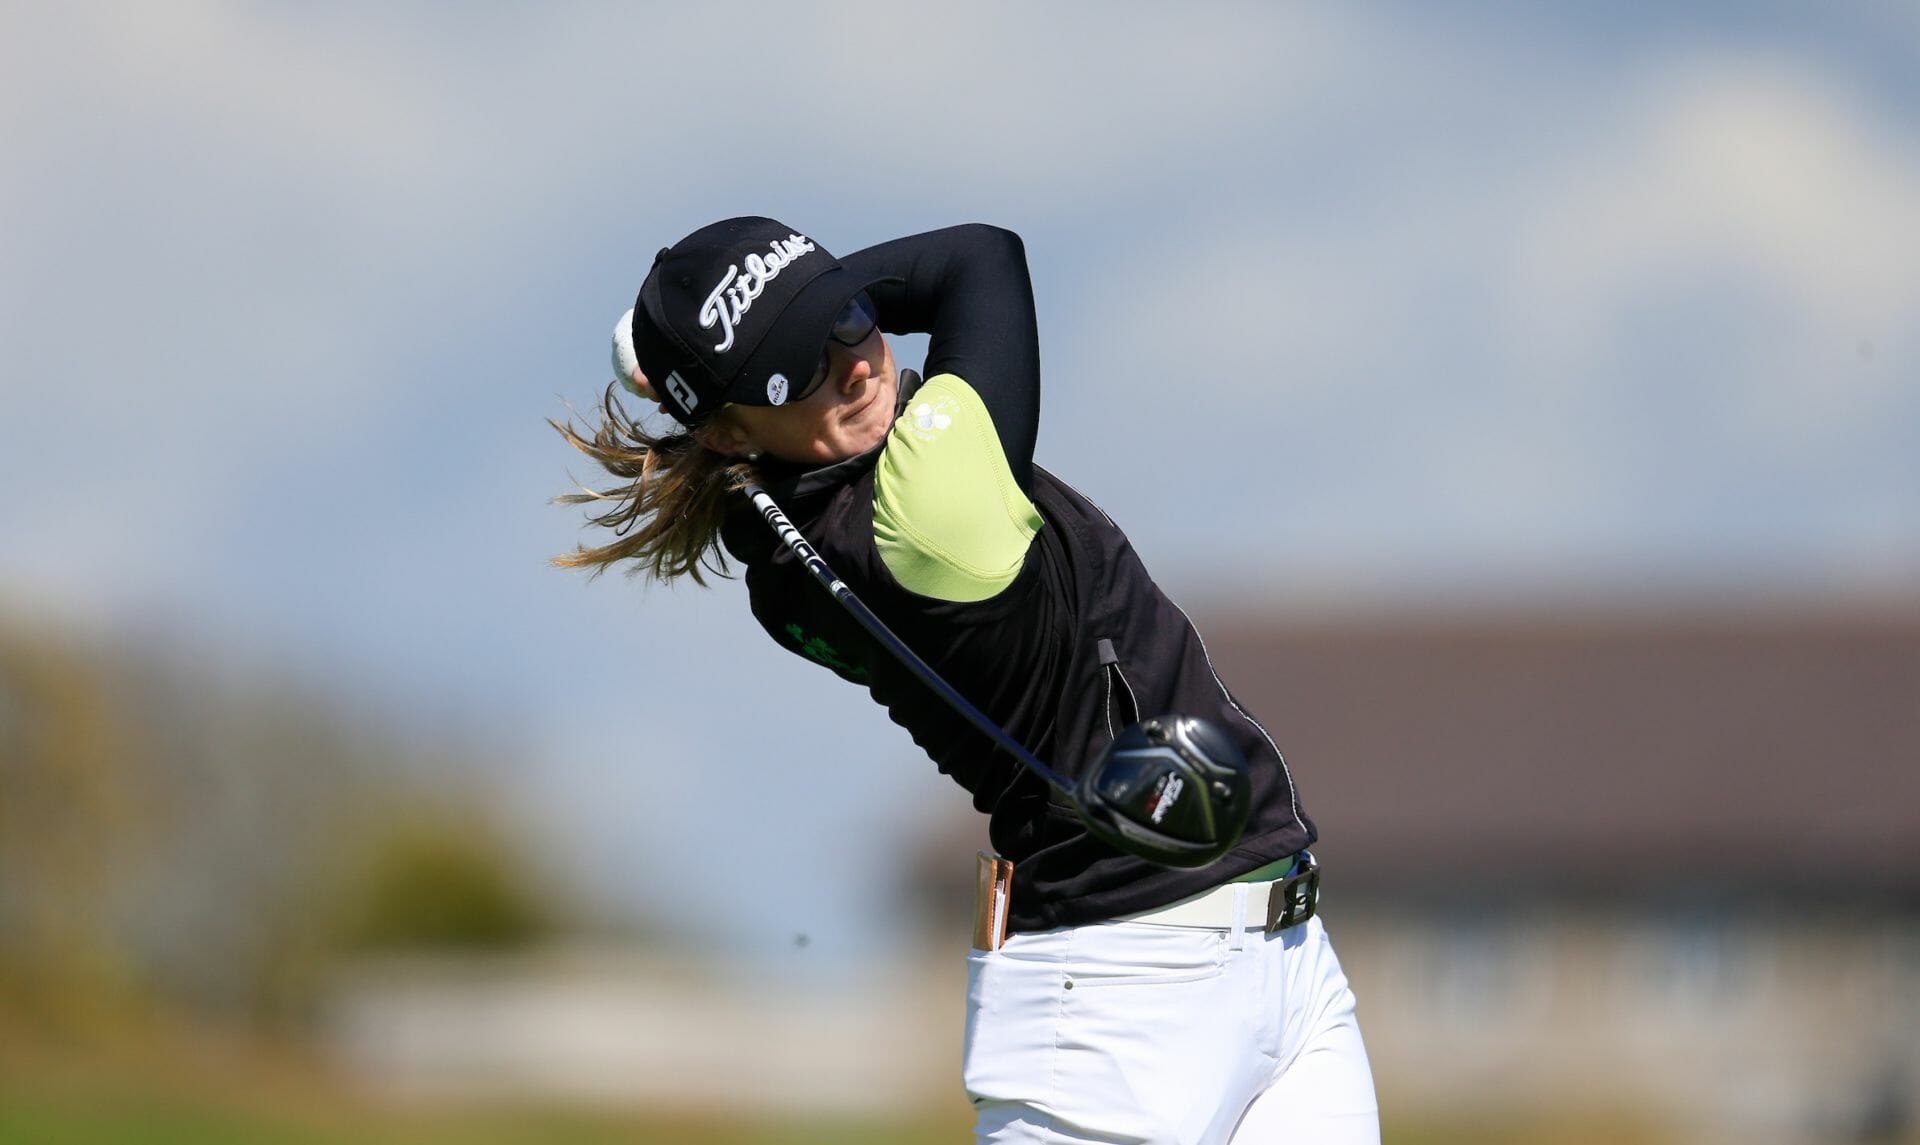 Campbell and Ross set the standard at Ulster Stroke Play